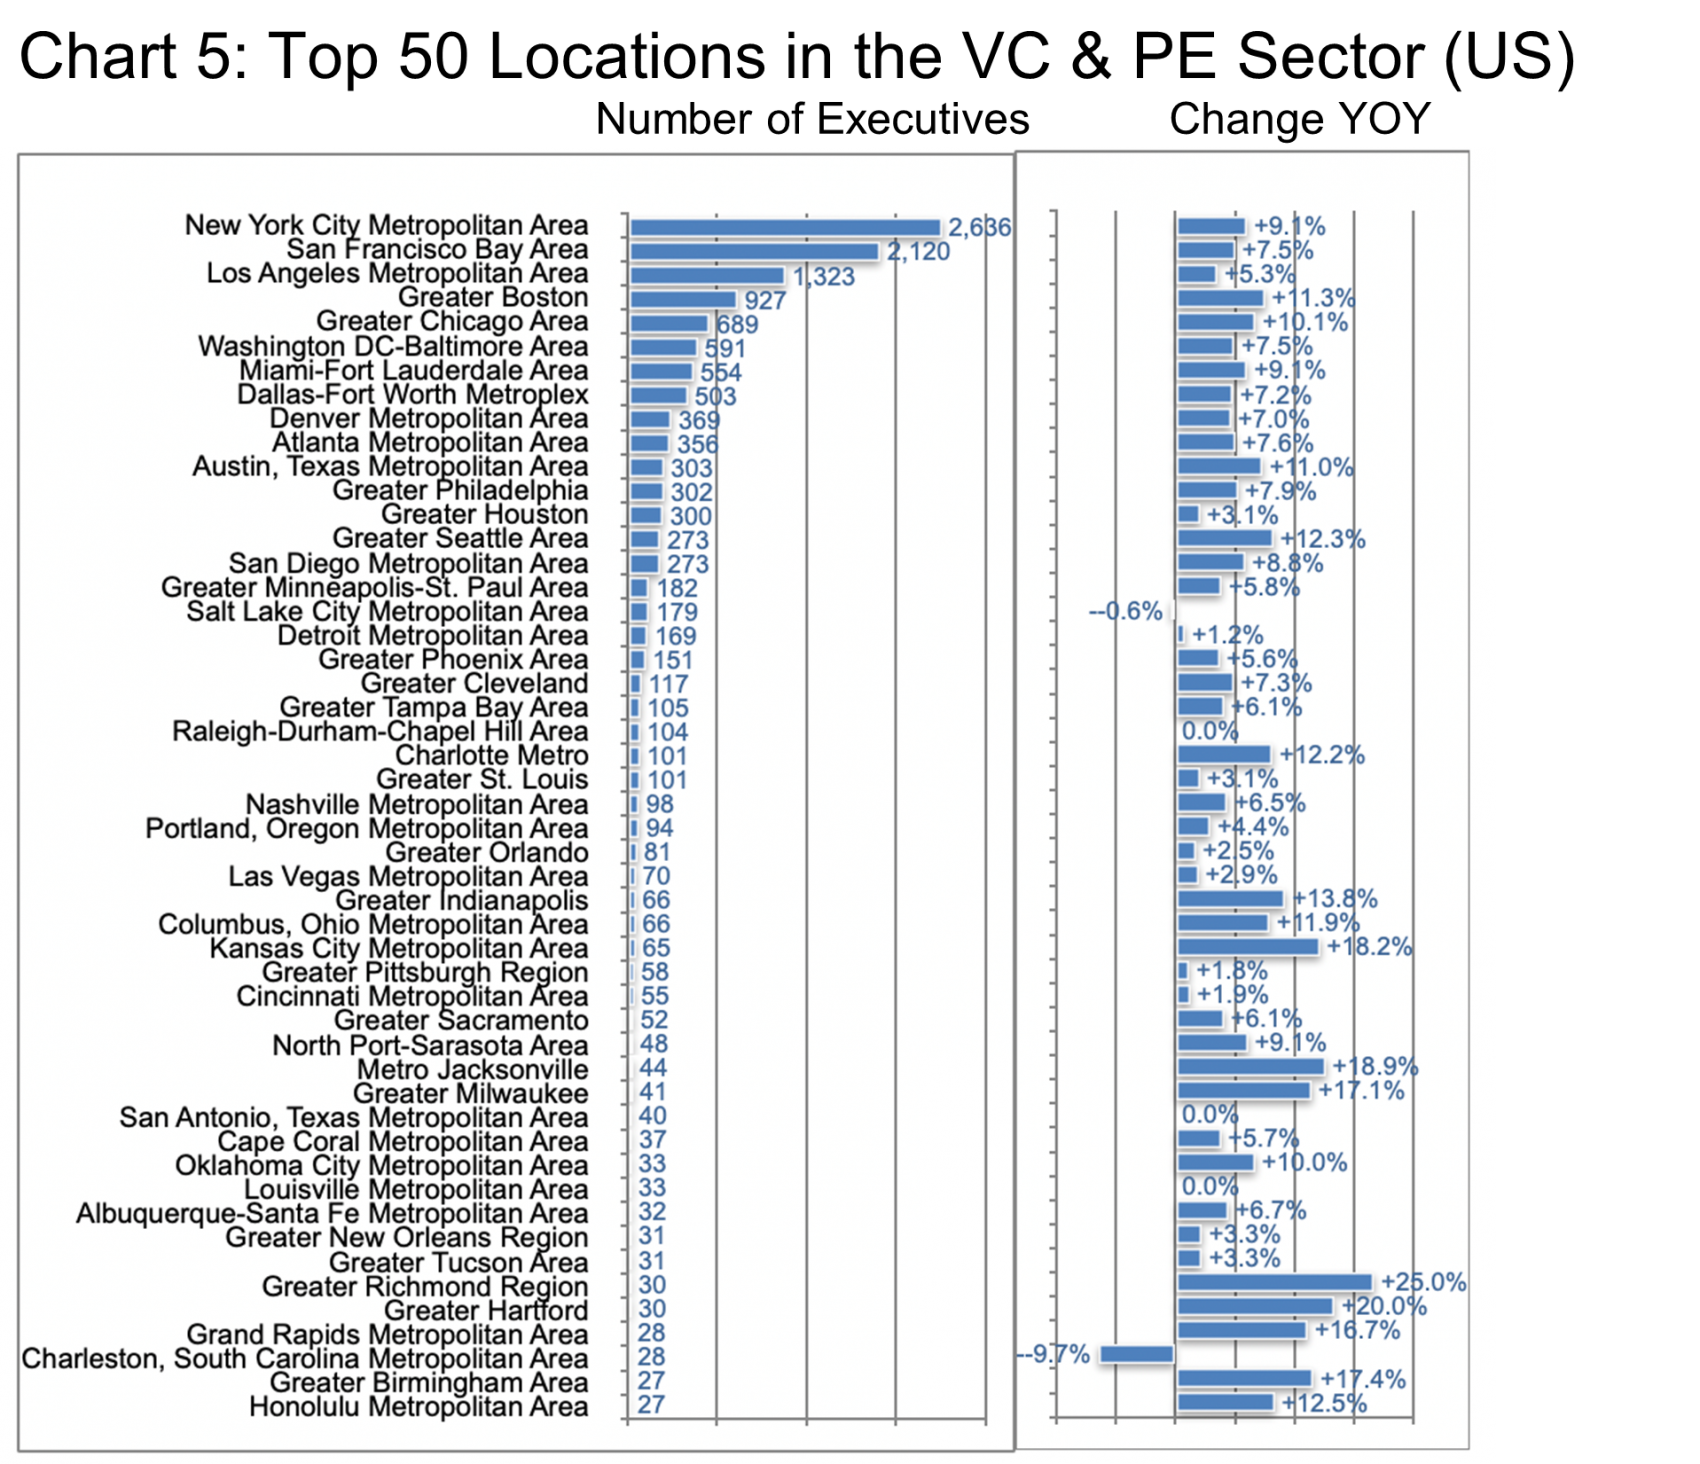 Top 50 Locations in the VC & PE Sector (US): Chart 5